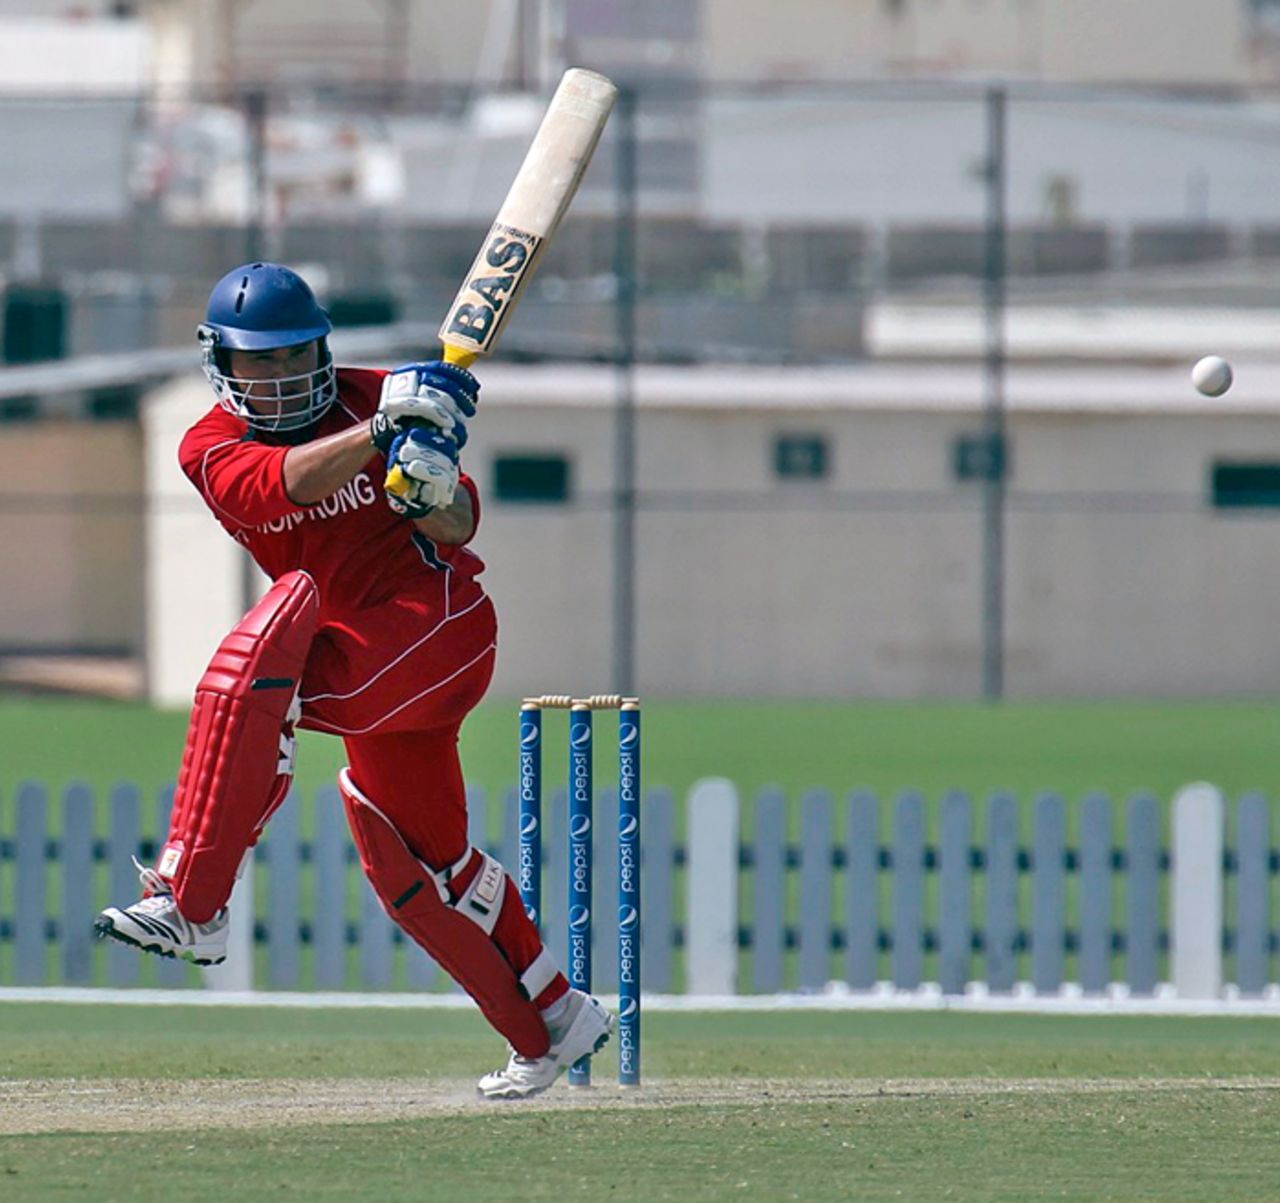 Roy Lamsam tucks the ball to the leg side during his innings of 40 against Bermuda at the ICC World Cricket League Division 2 in Dubai on 9th April 2011